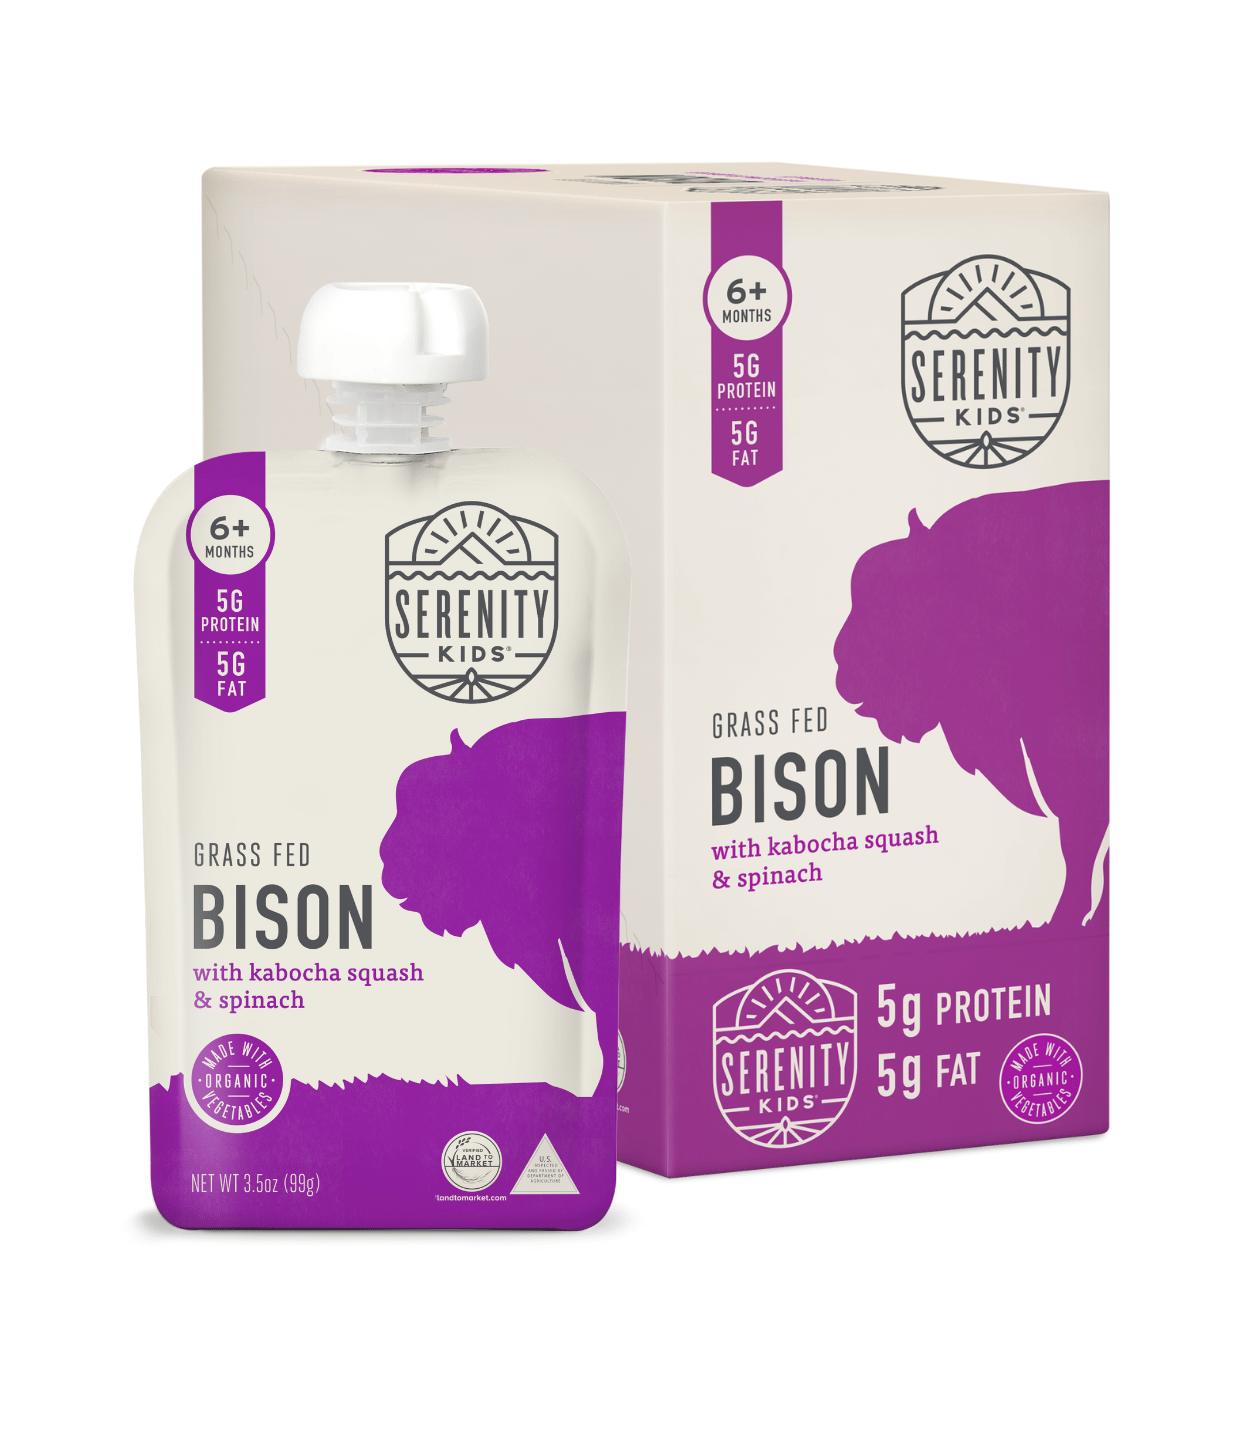 Grass Fed Bison Baby Food Pouch with Organic Kabocha Squash and Spinach